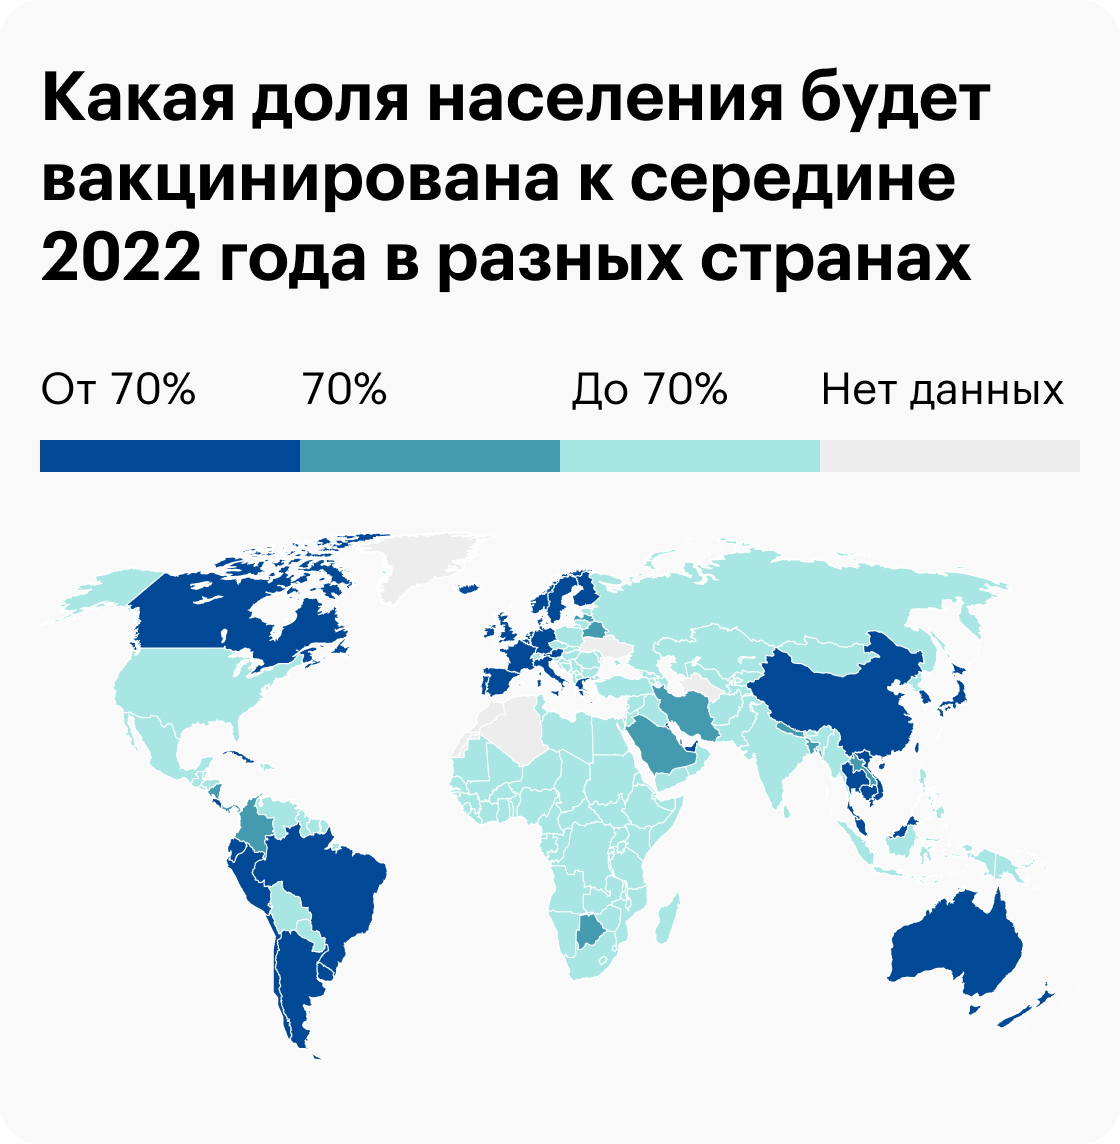 Источник: Our World in Data